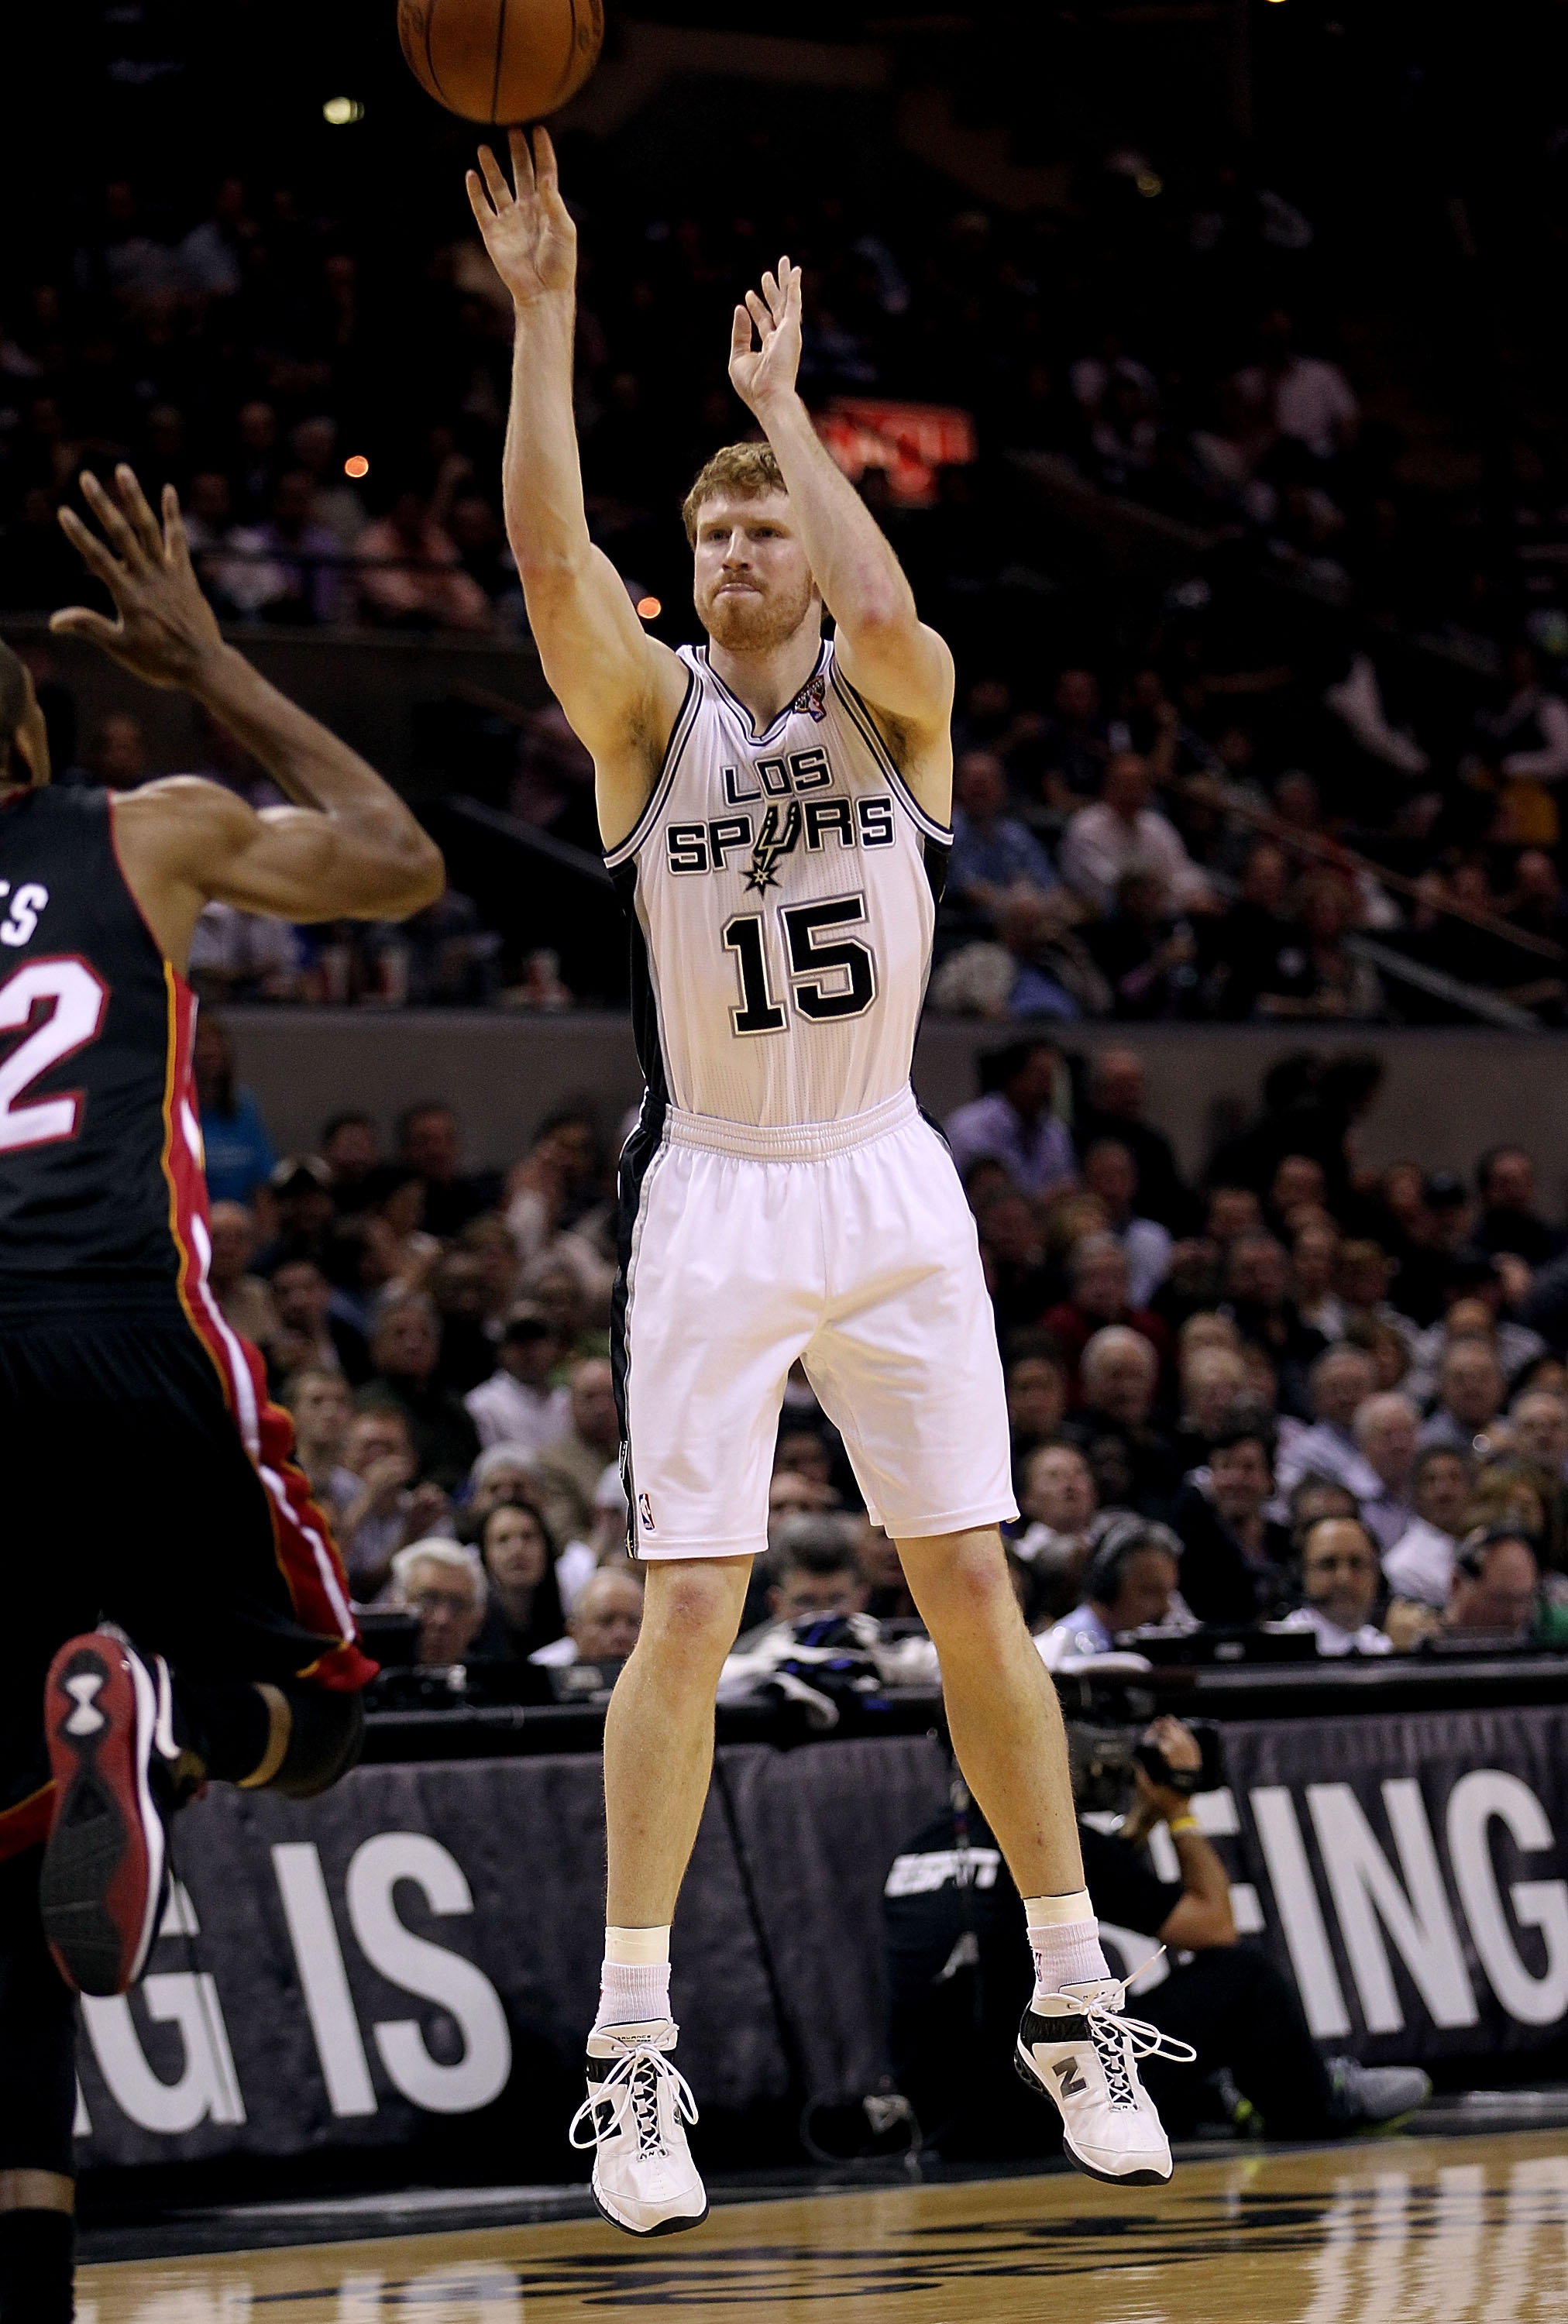 SAN ANTONIO, TX - MARCH 04:  Forward Matt Bonner #15 of the San Antonio Spurs takes a three point shot against the Miami Heat at AT&T Center on March 4, 2011 in San Antonio, Texas.   NOTE TO USER: User expressly acknowledges and agrees that, by downloadin